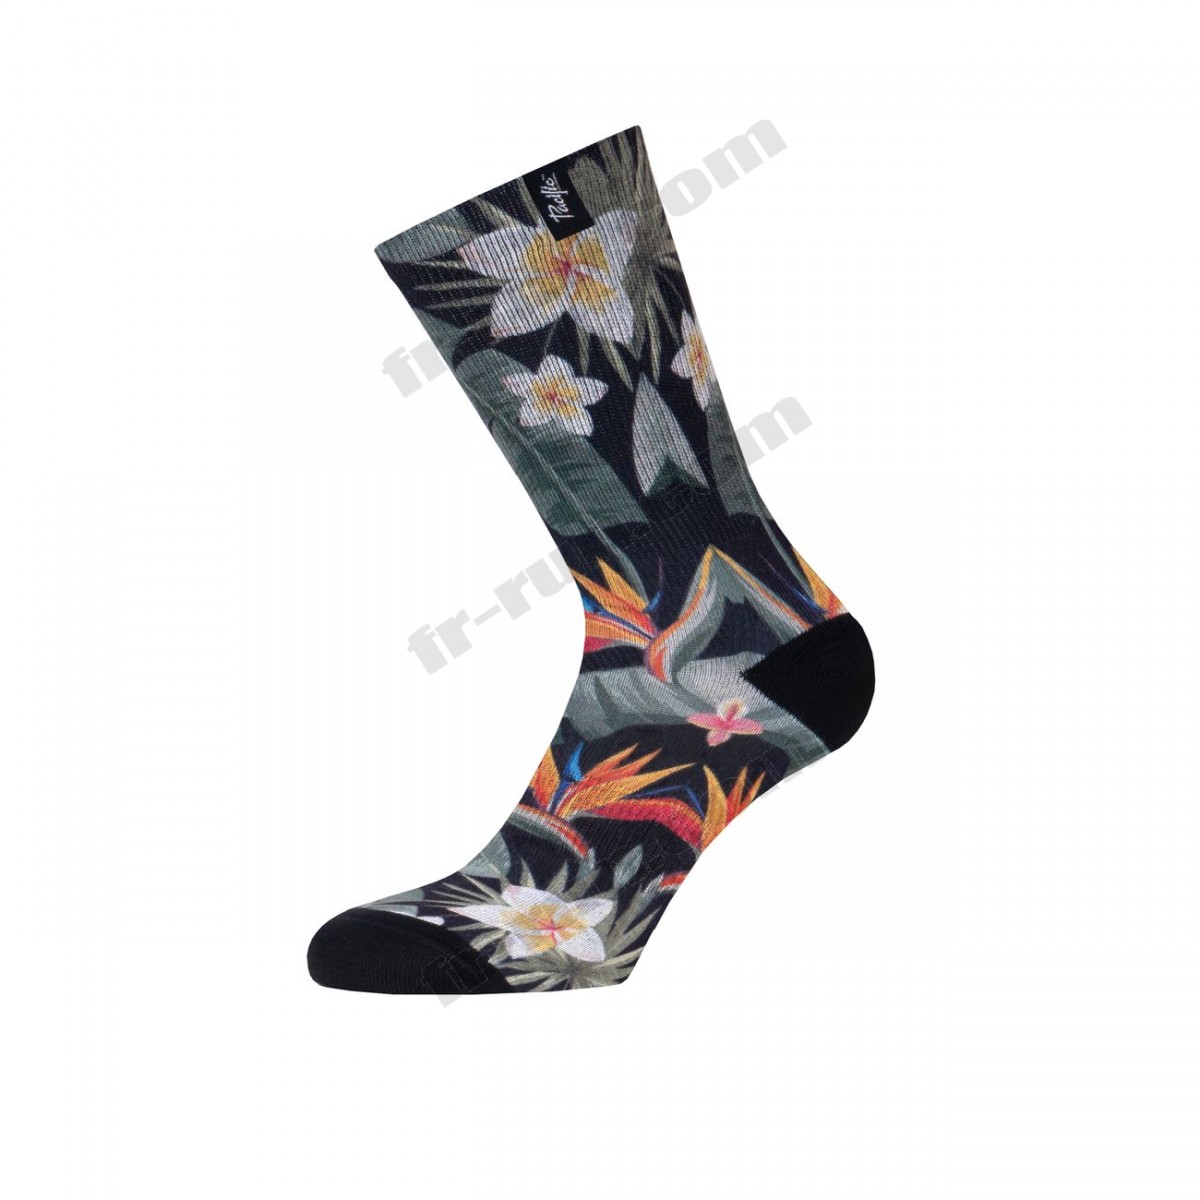 Pacific And Co/running adulte PACIFIC and CO MALAY Unisex Performance Socks ◇◇◇ Pas Cher Du Tout - -1